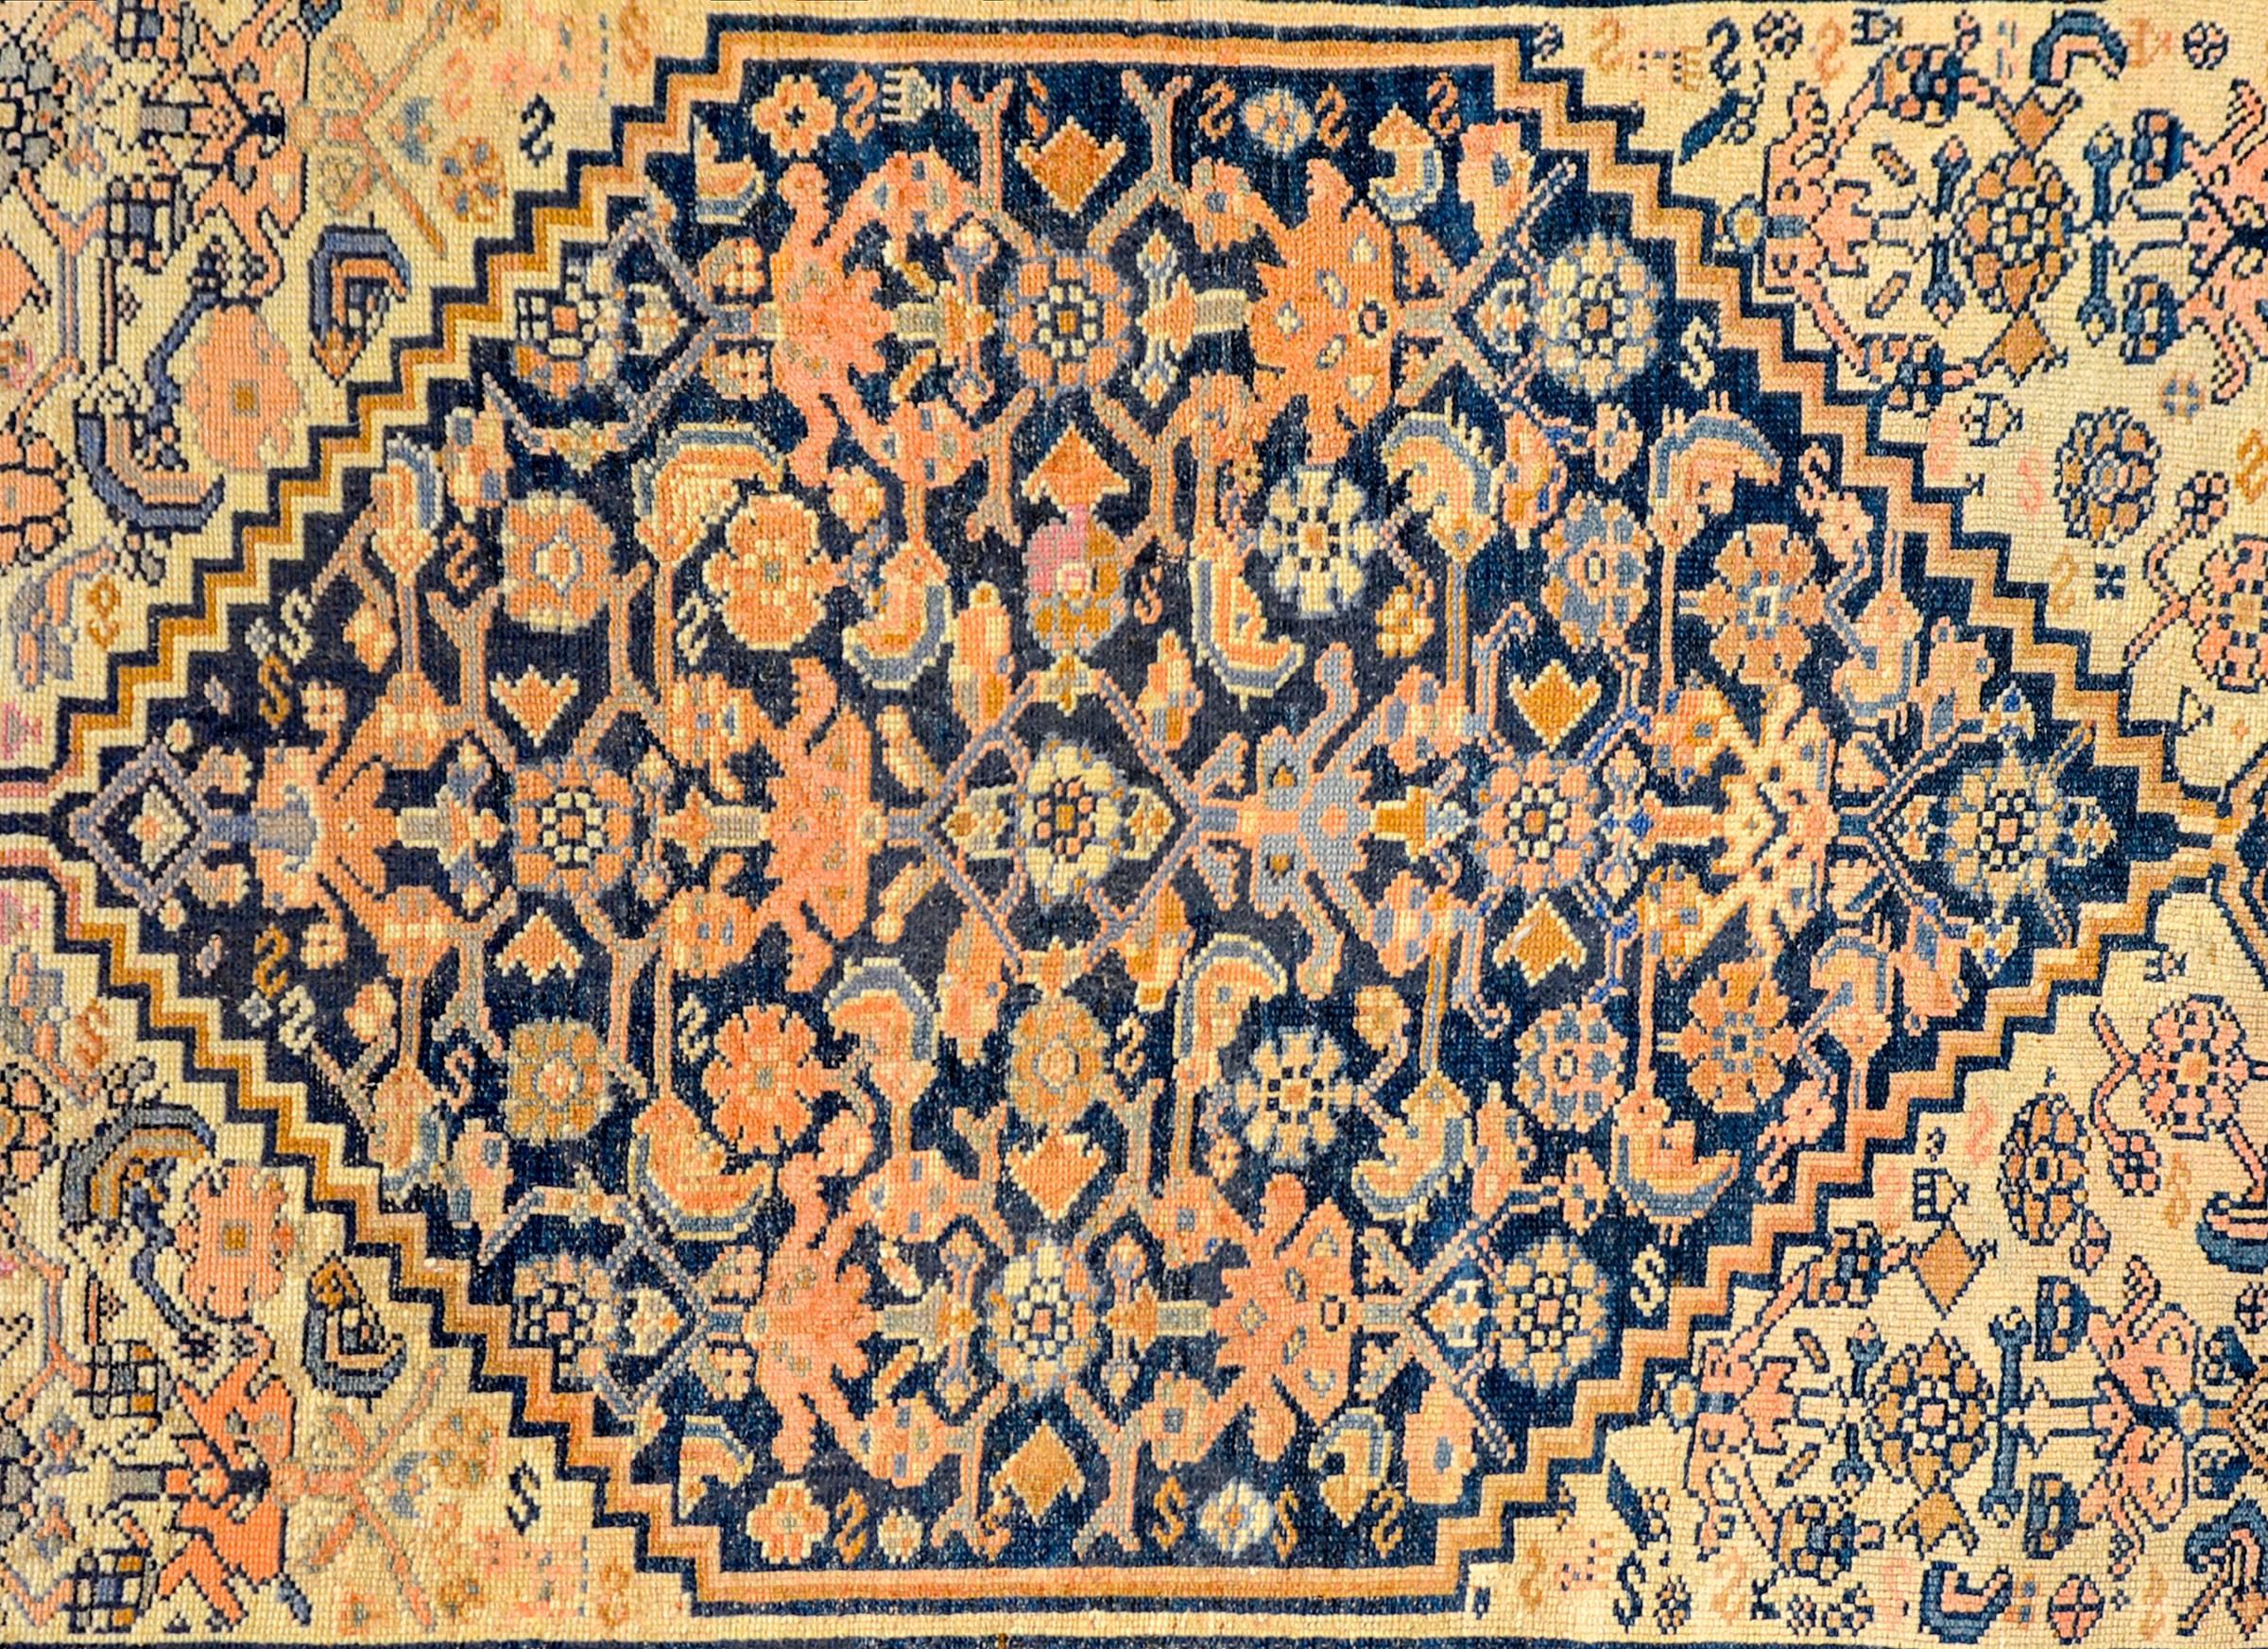 A wonderful early 20th century Persian Azari rug with a large diamond medallion with a light indigo, gold, and orange lattice floral and vine pattern on a dark indigo background amidst a field of similarly designed floral lattice patterned field.